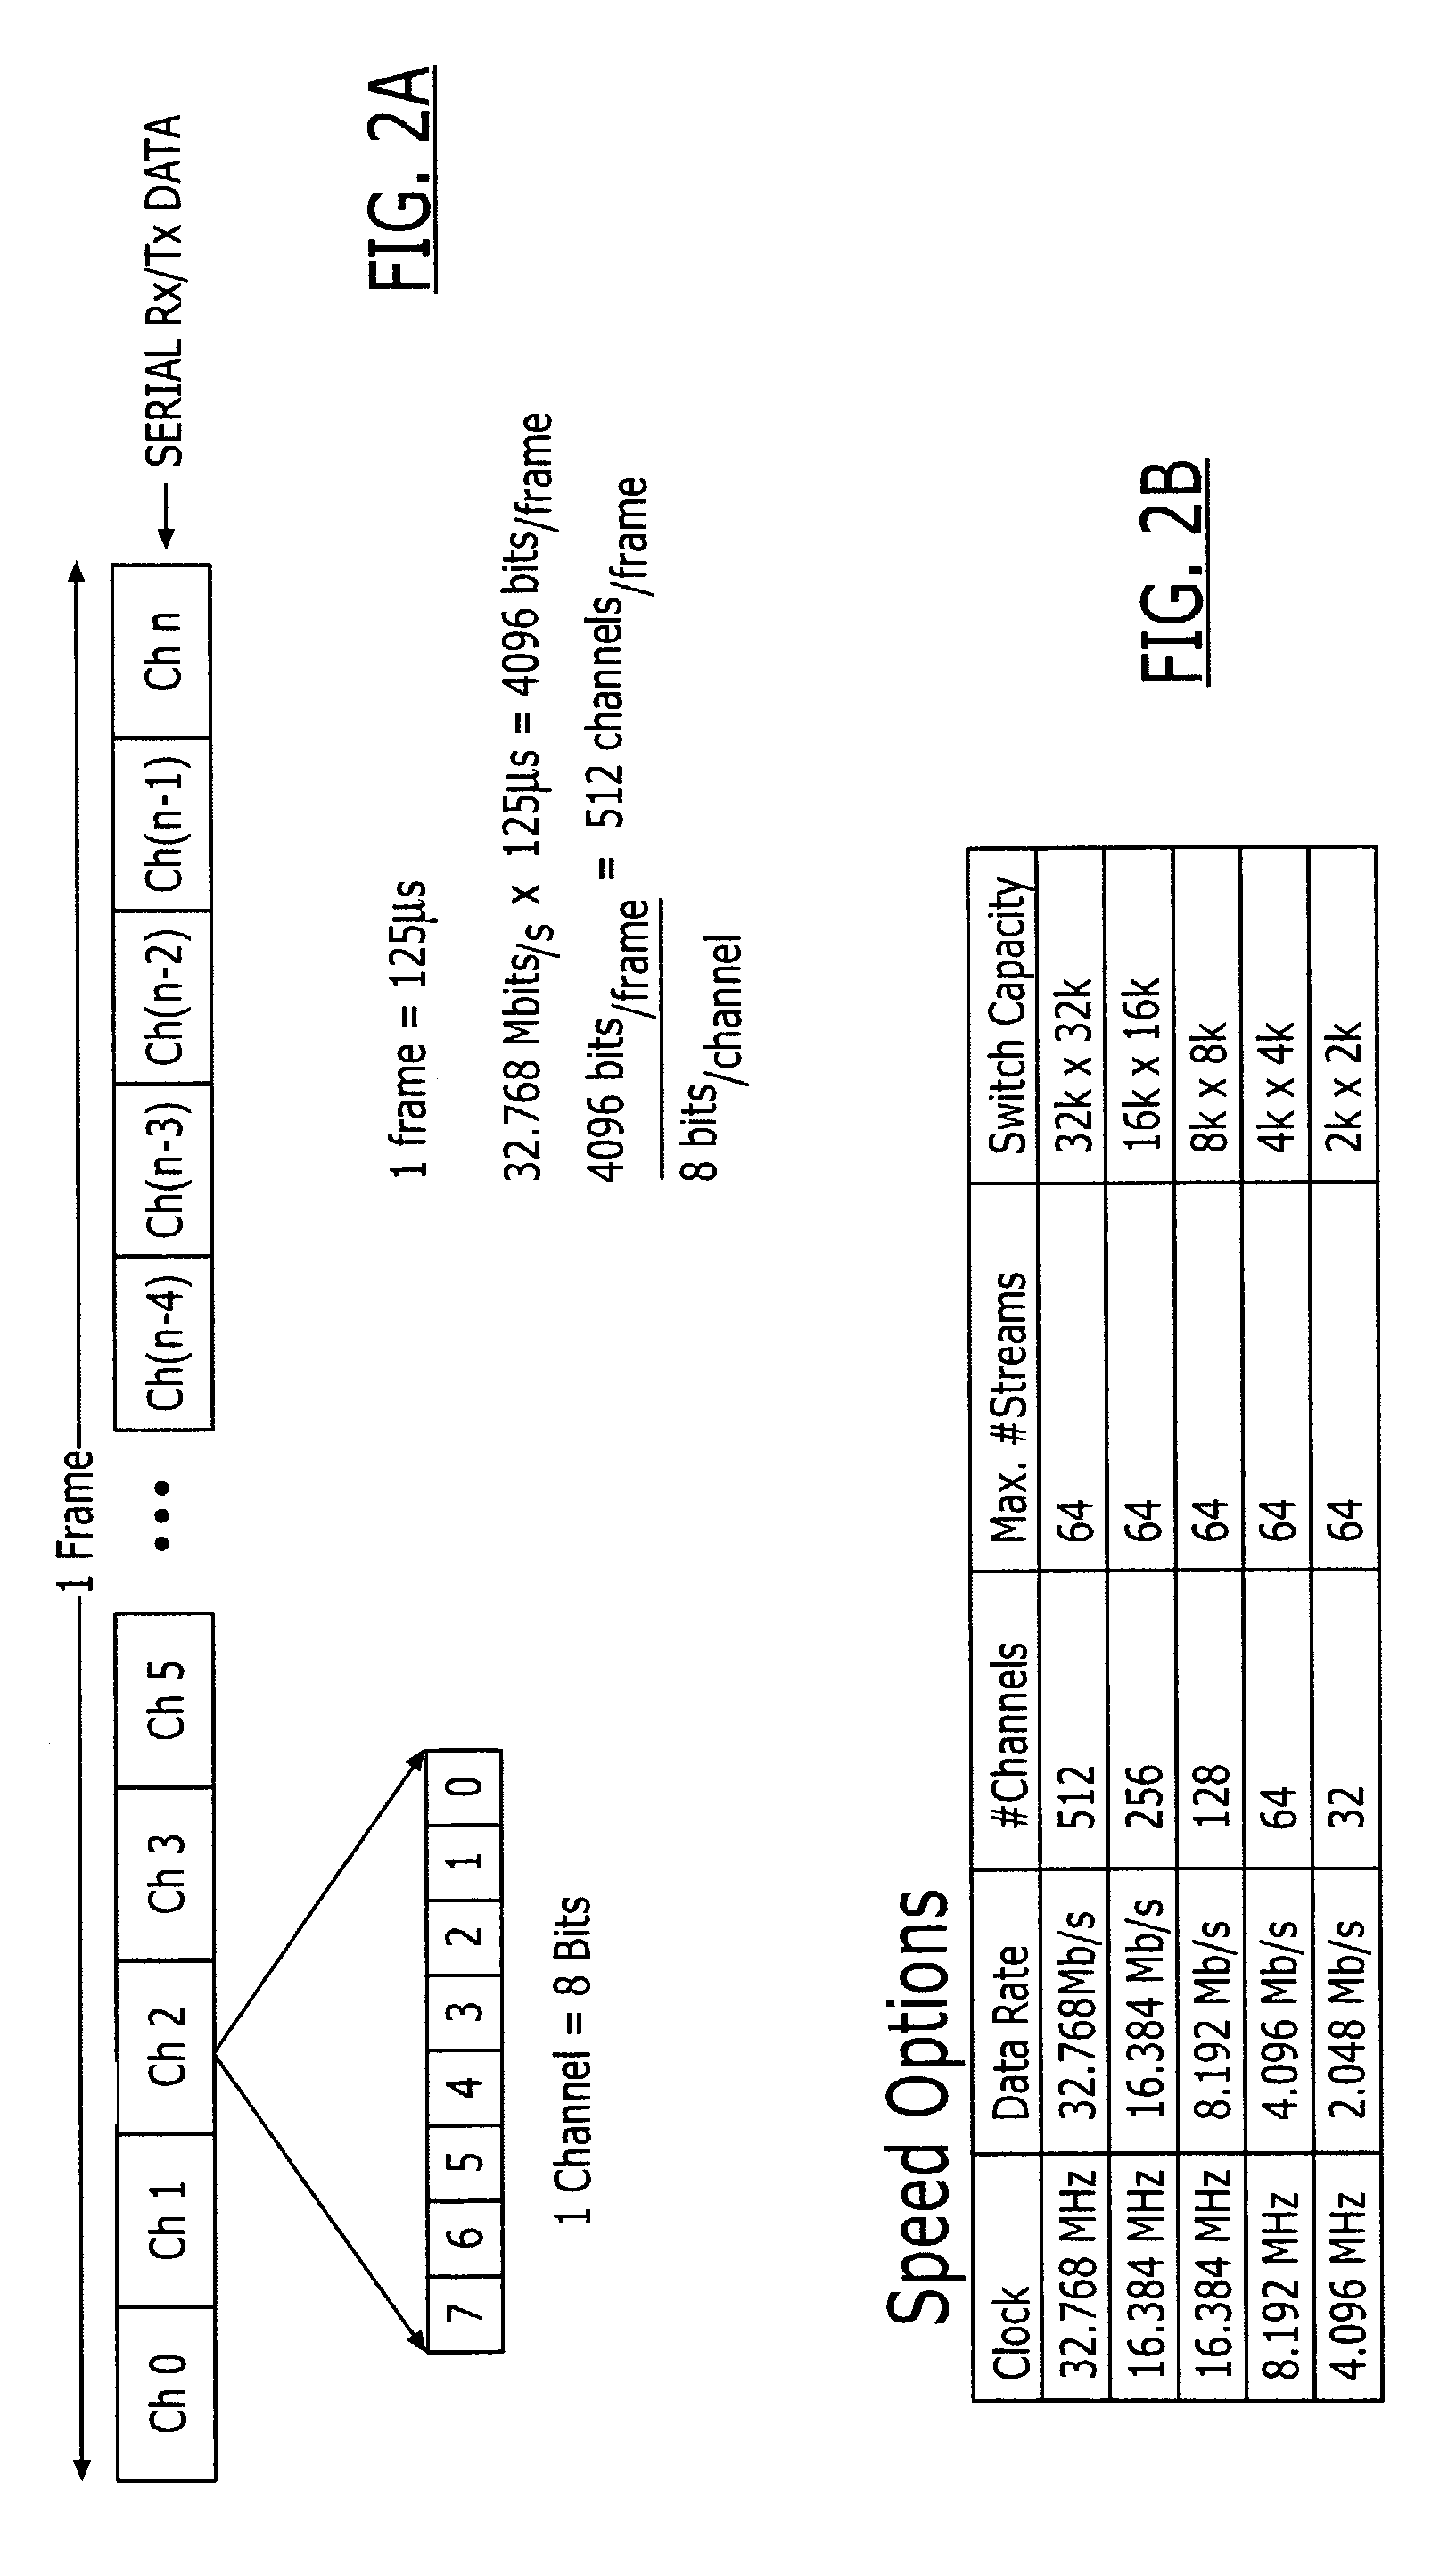 Time-slot interchange switches having efficient block programming and on-chip bypass capabilities and methods of operating same